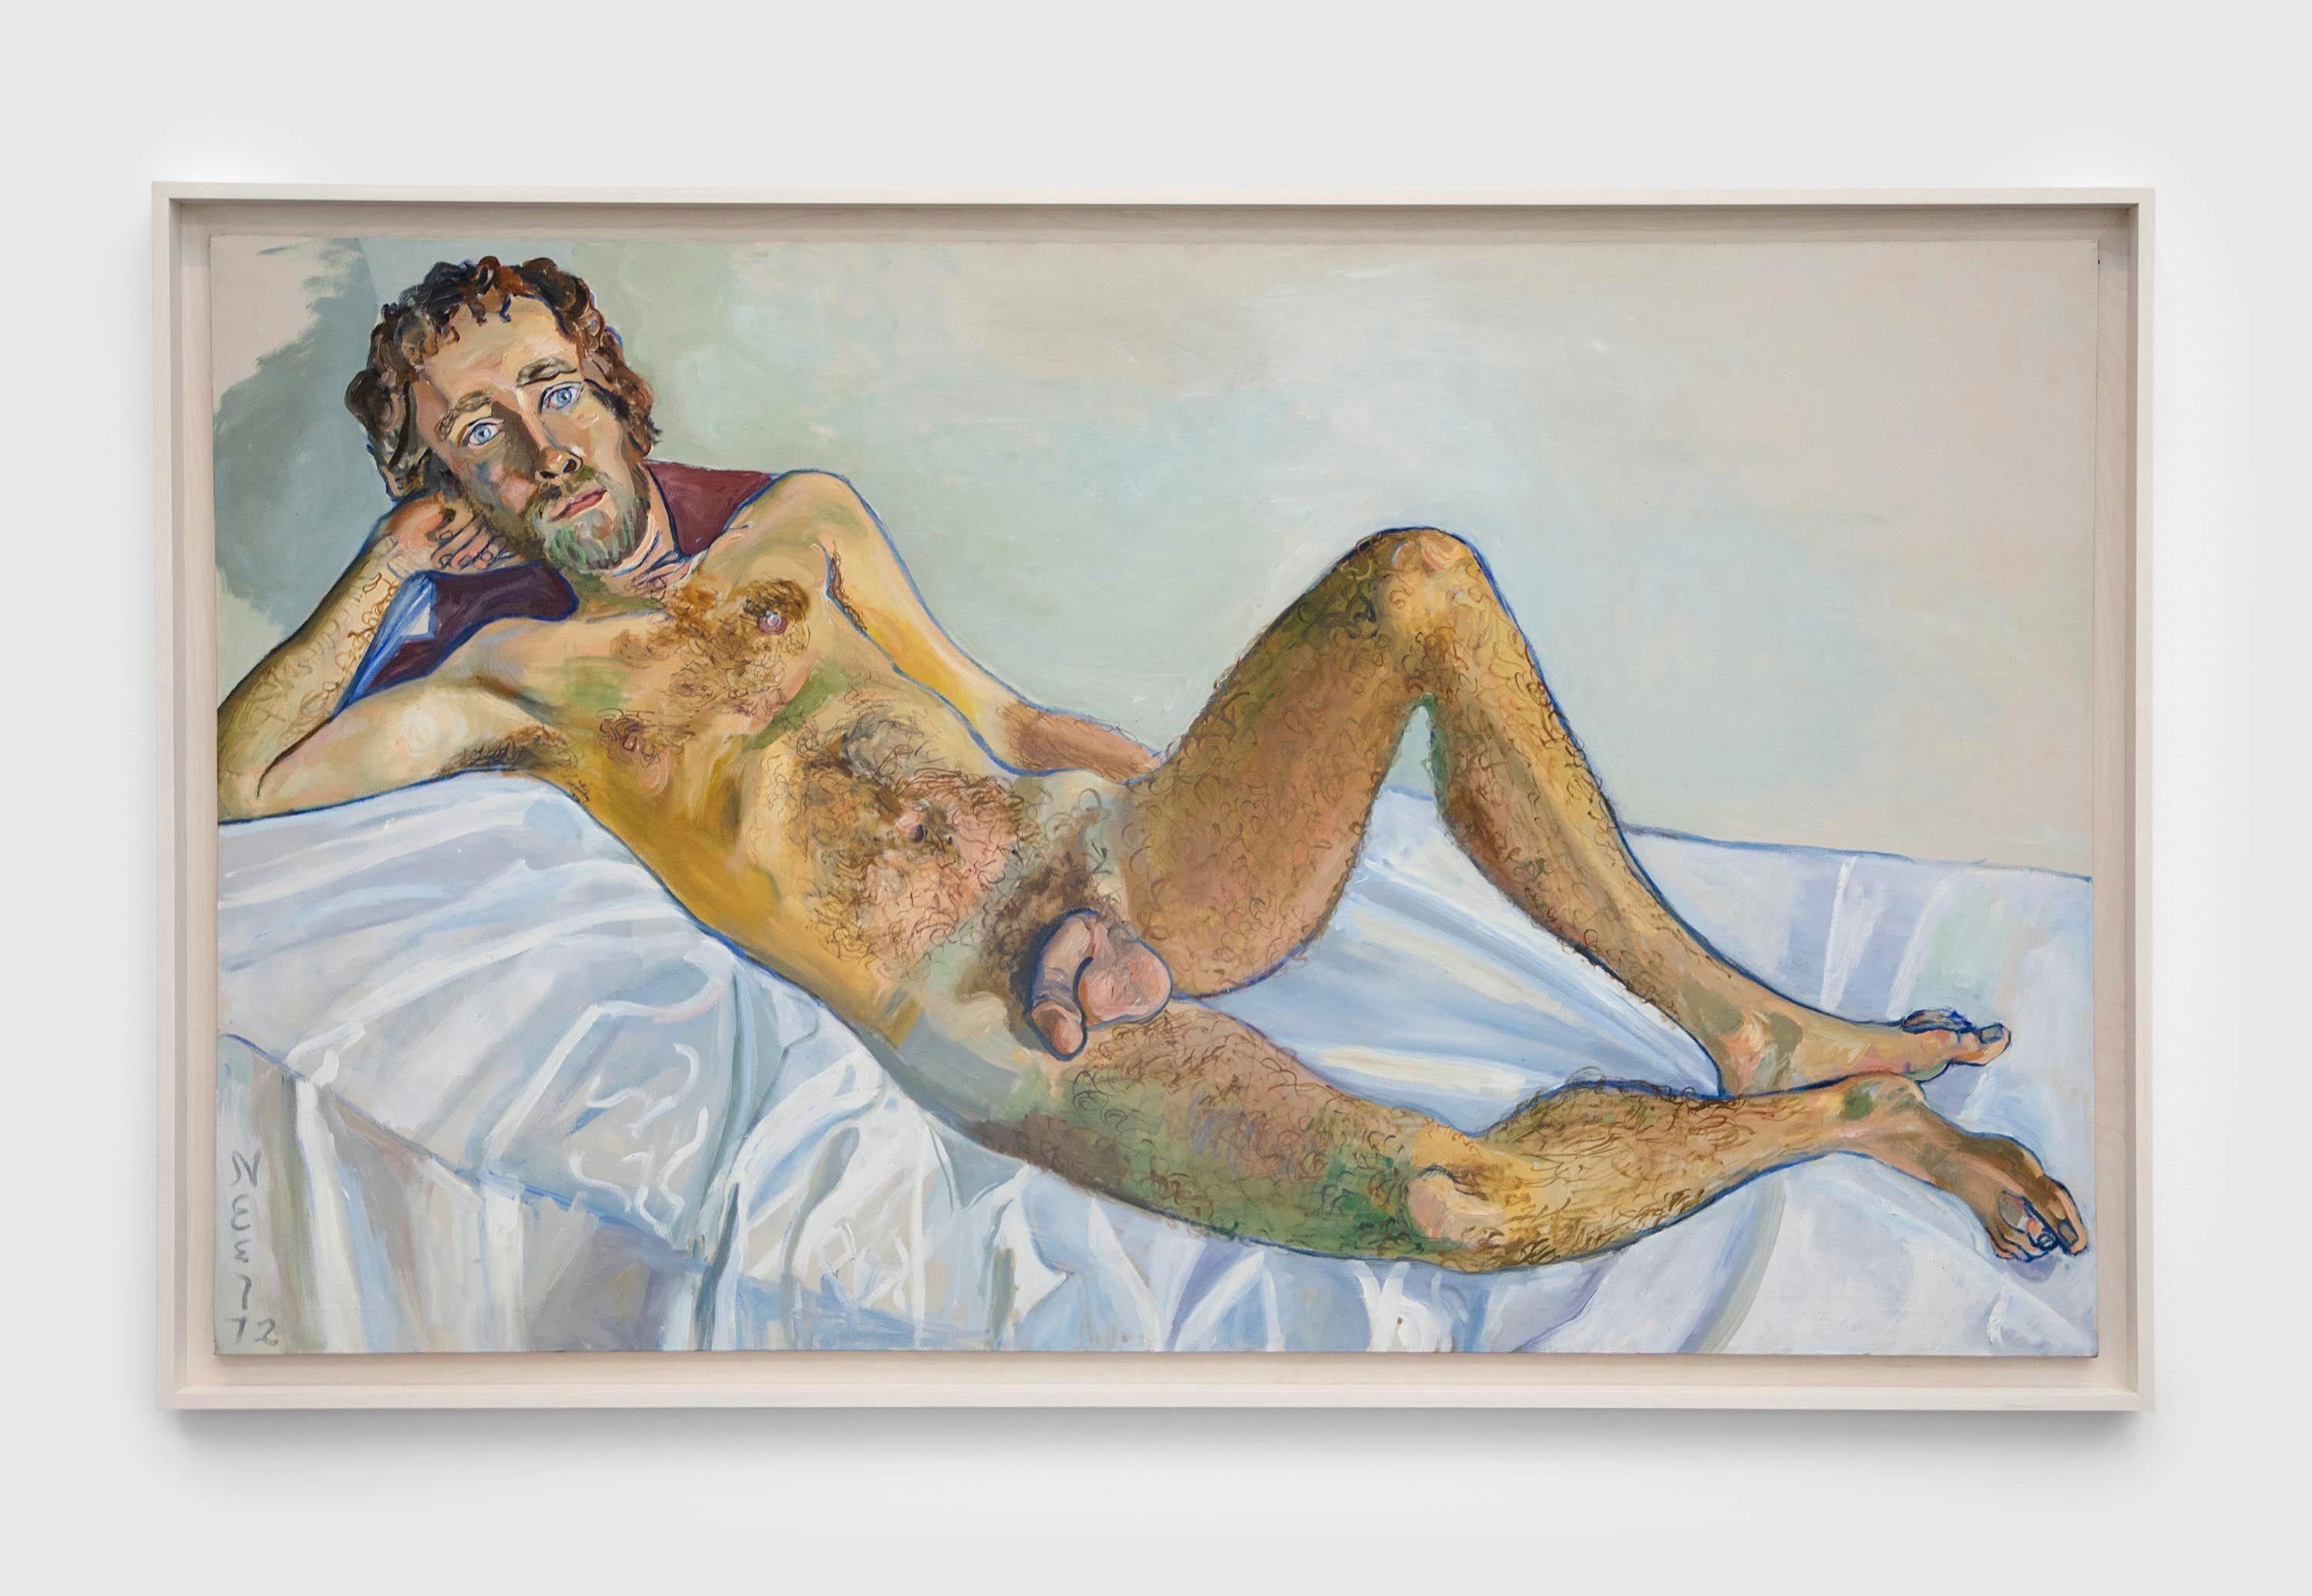 A painting by Alice Neel, titled John Perreault, dated 1972.